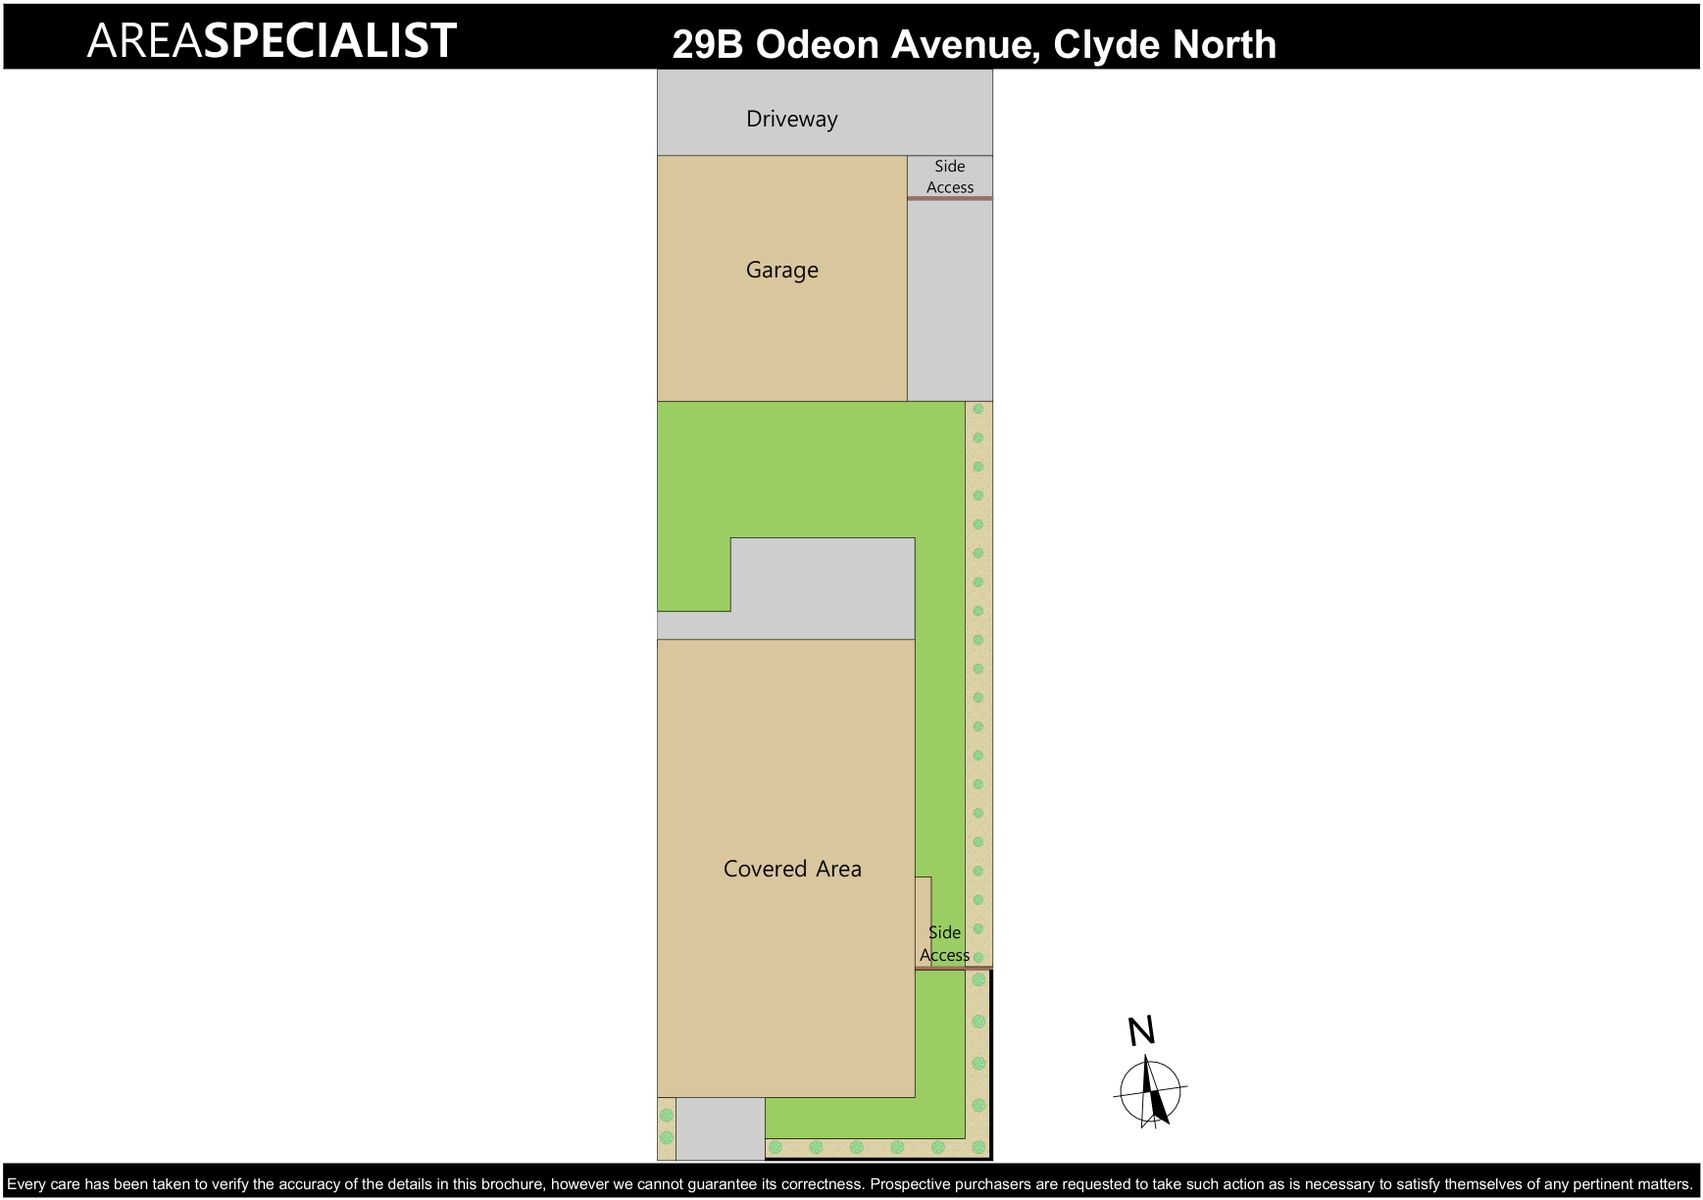 29B Odeon Avenue in Clyde North Site